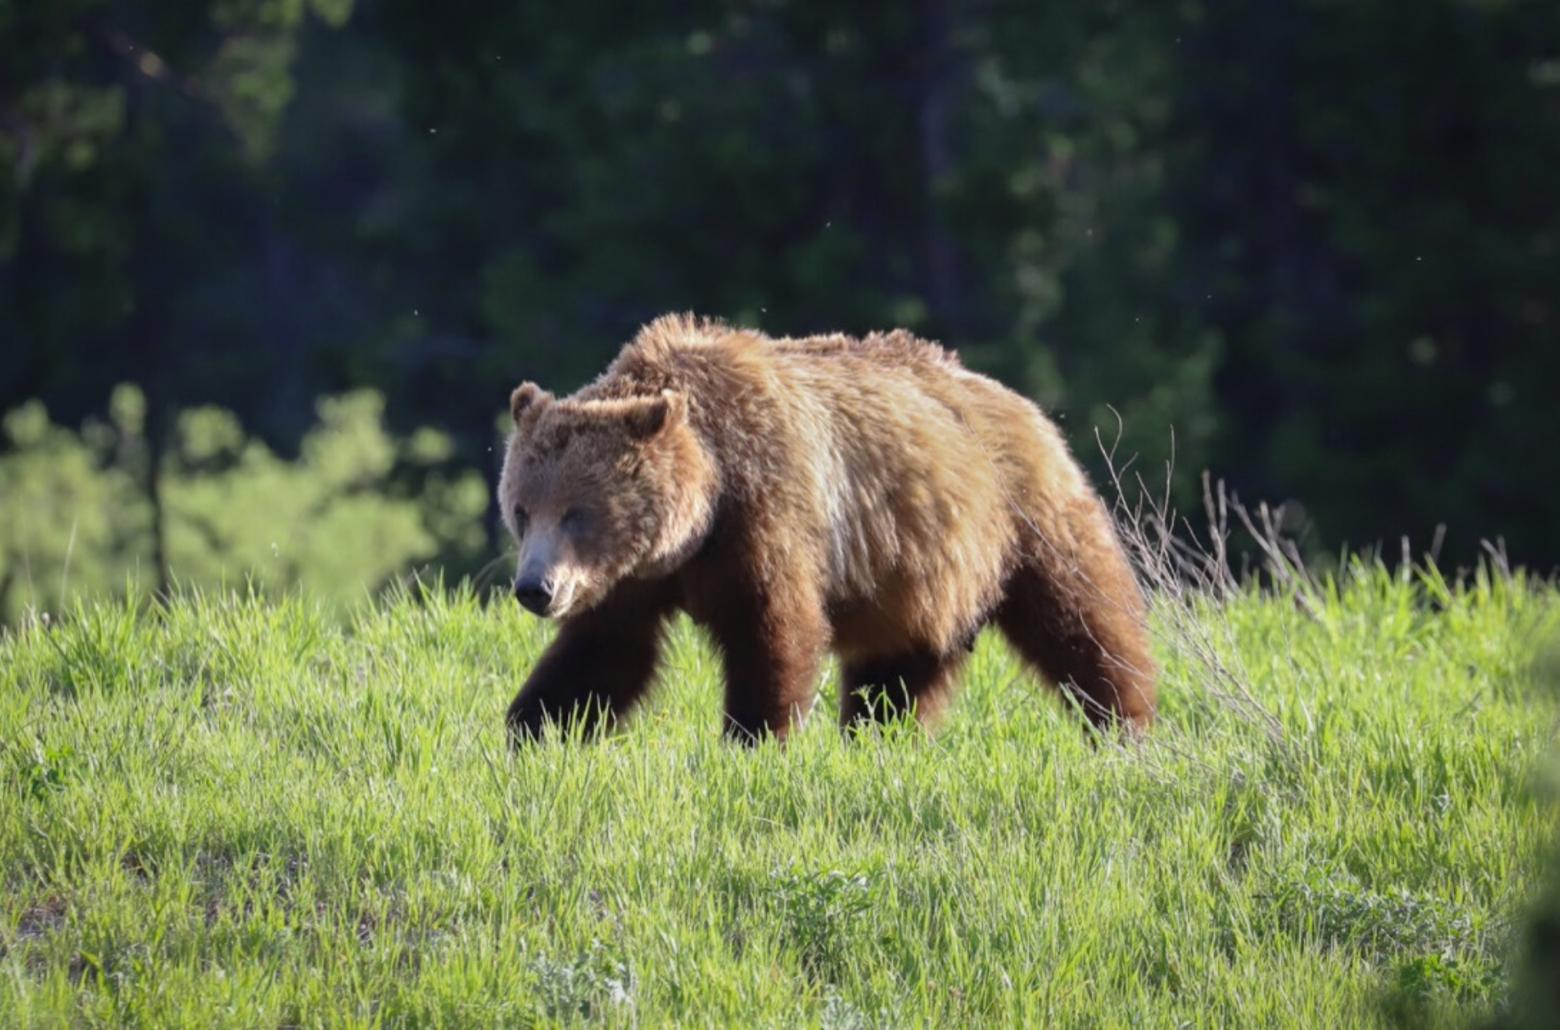 Greater Yellowstone emanates a rarefied sense of wildness so rare in the human-dominated US. Castro-Root captured this photo of famous Jackson Hole Grizzly 399. Animals like her put into context what's at stake and why facts in reporting about nature matter. 